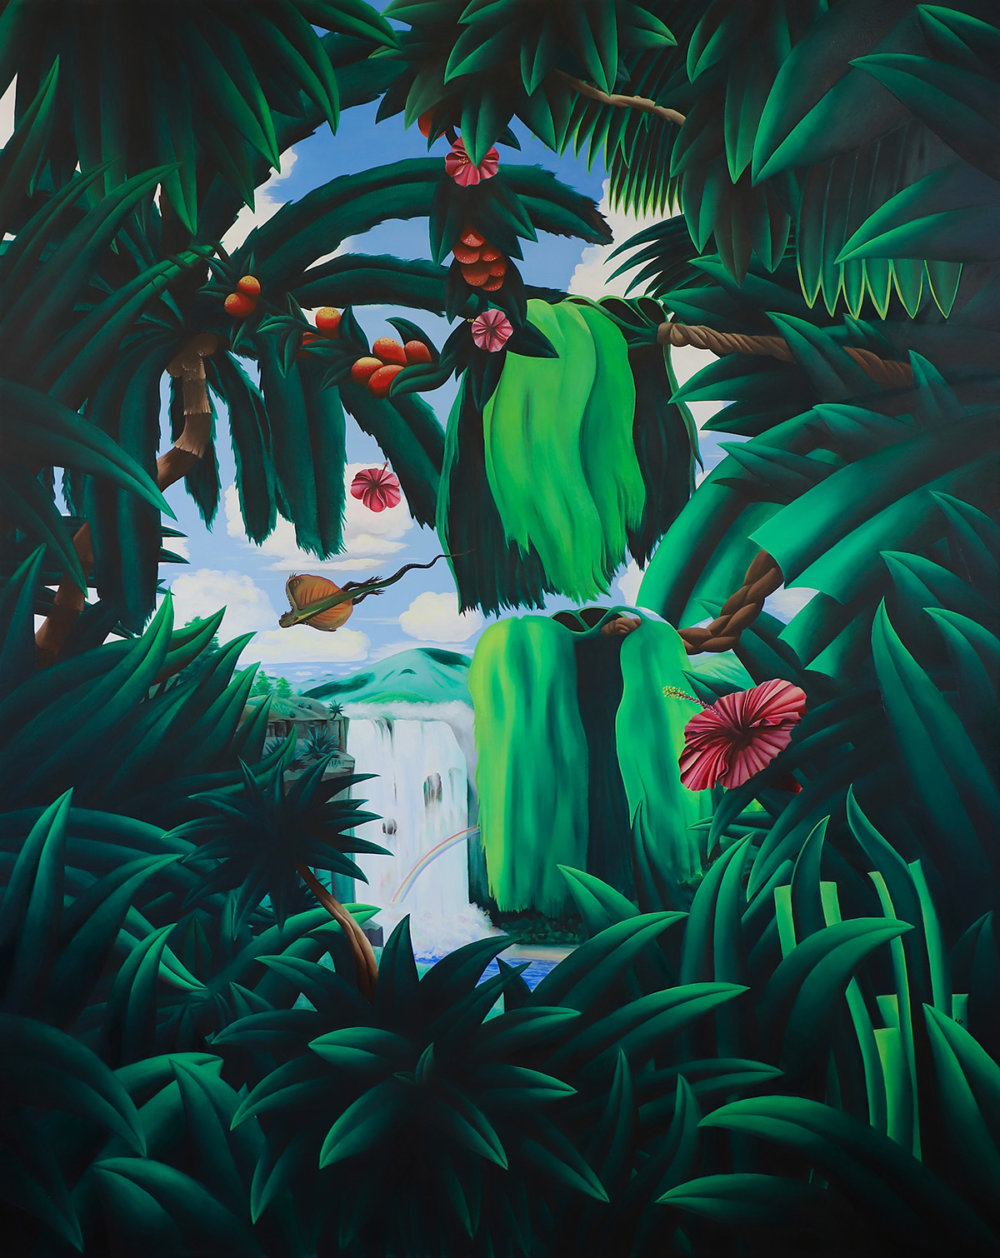 Elegant Chaos Vibrant Surrealist Paintings Of Tropical Fauna And Flora By Anthony Padilla 4